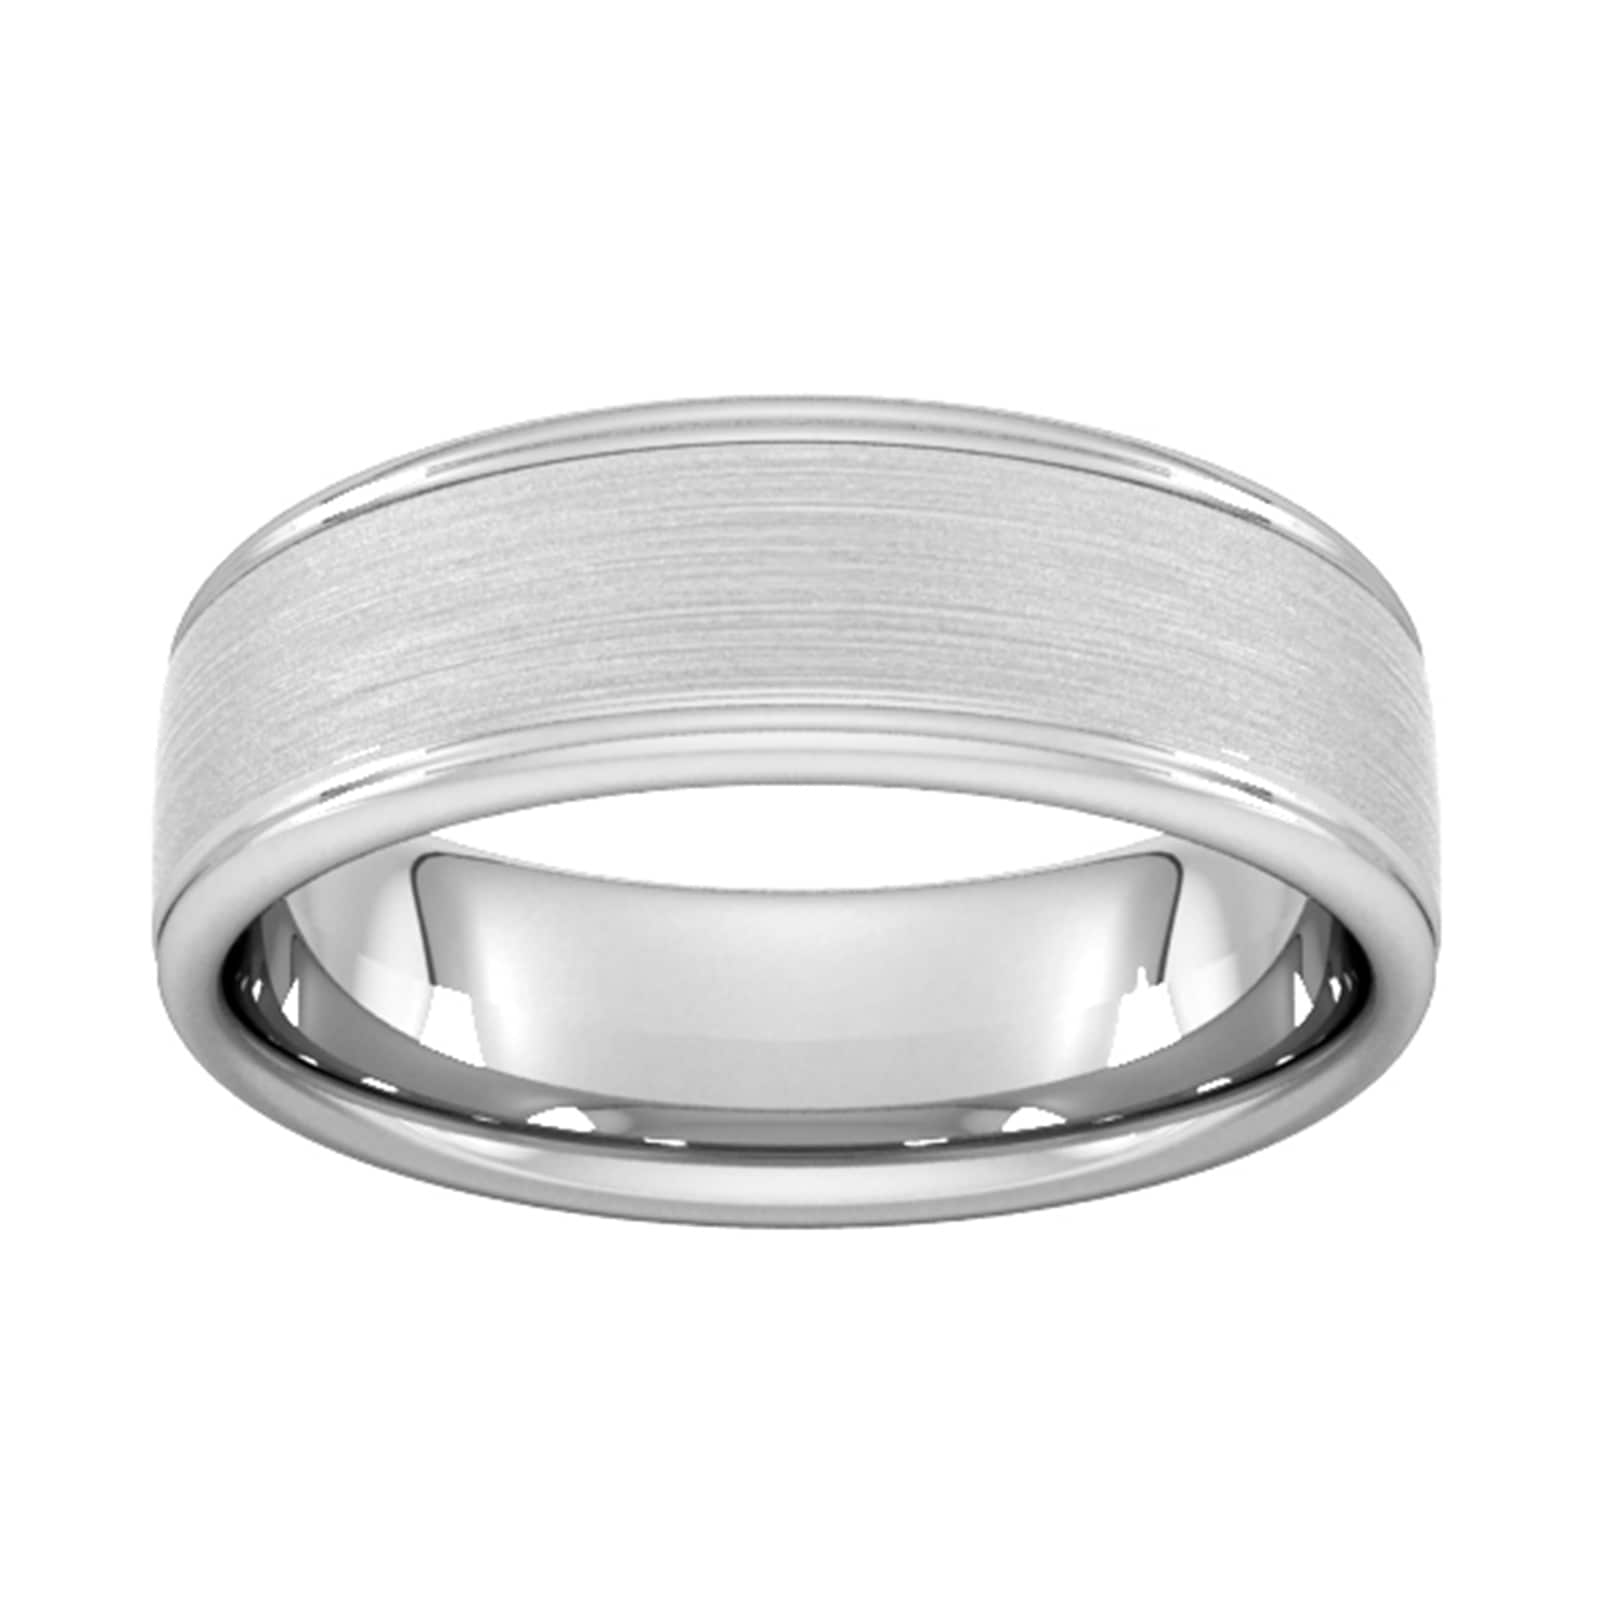 7mm D Shape Standard Matt Centre With Grooves Wedding Ring In Platinum - Ring Size P